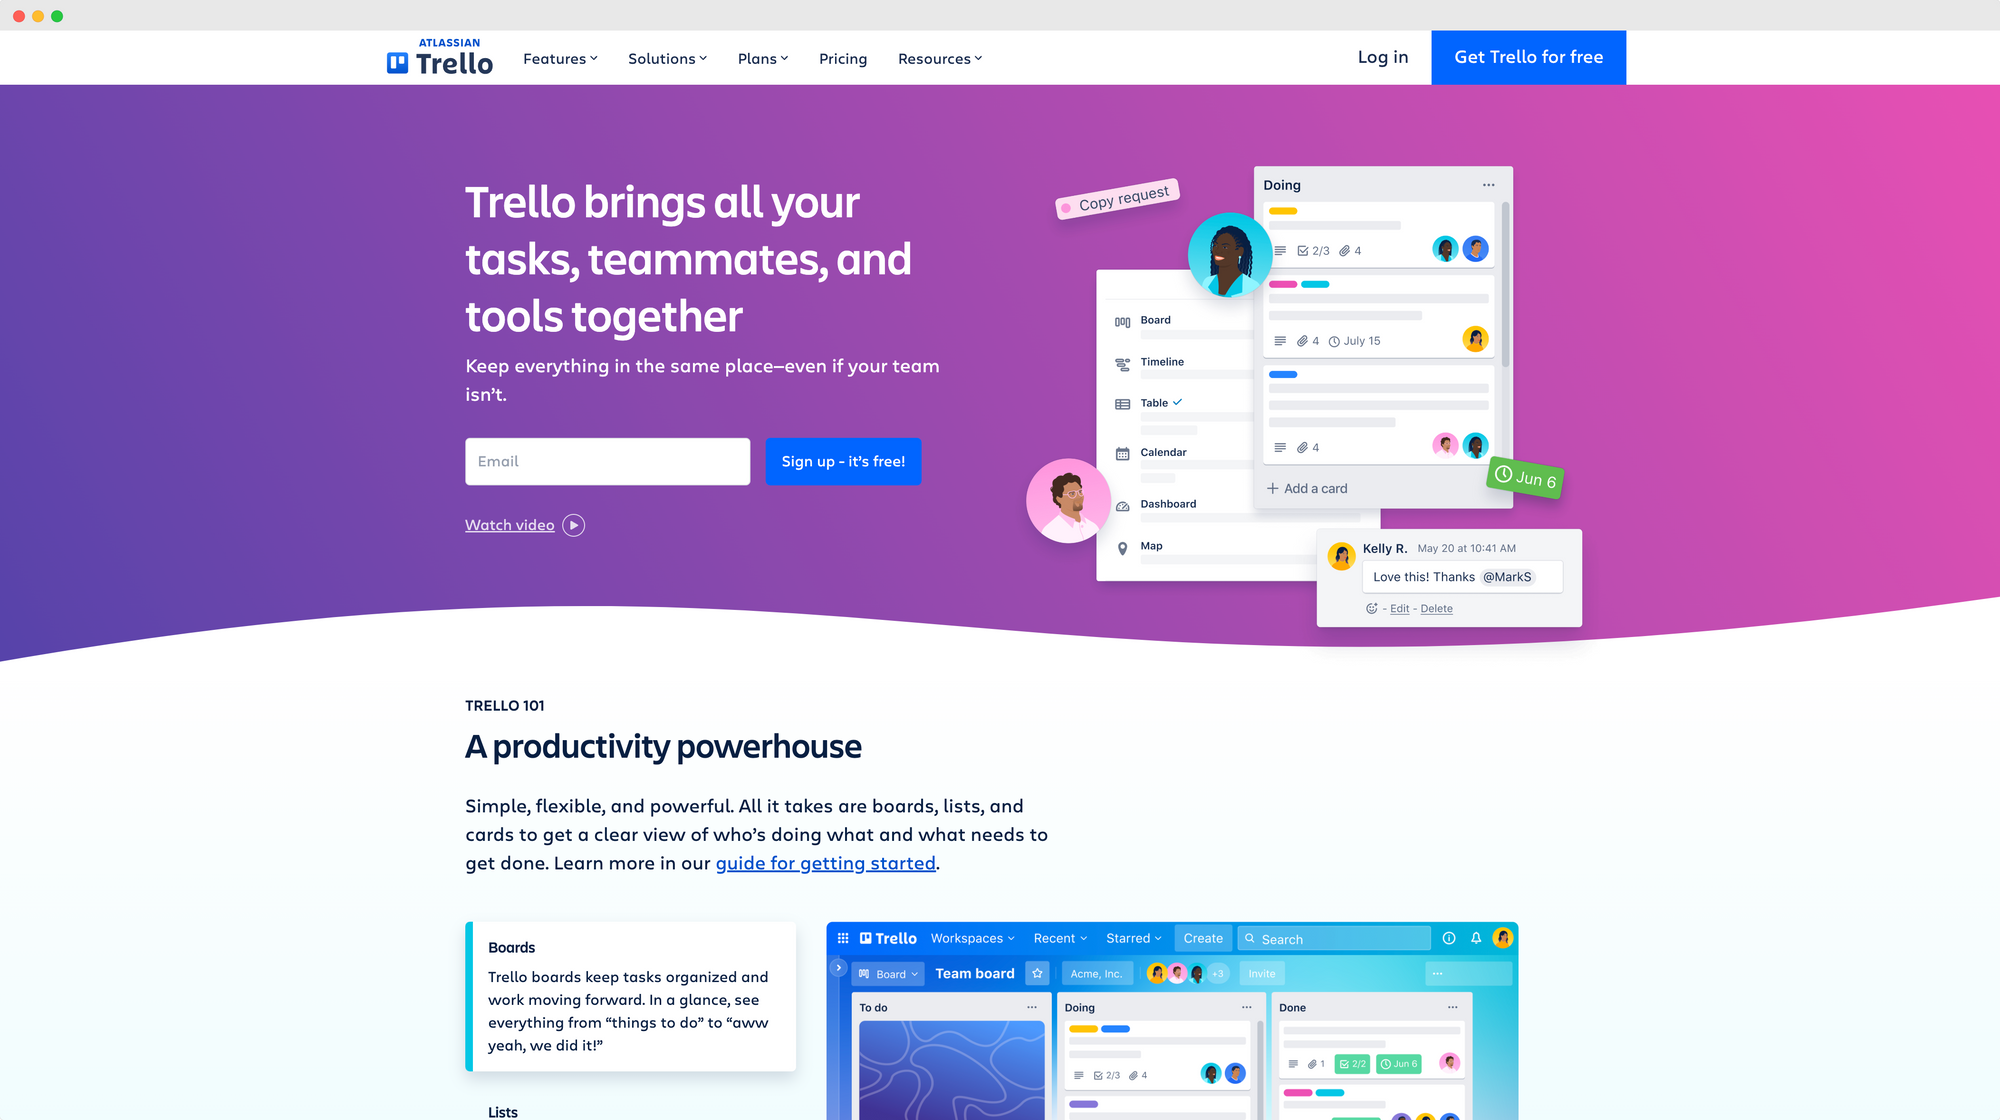 Screenshot of Trello's homepage, featuring task management tools and sign-up options